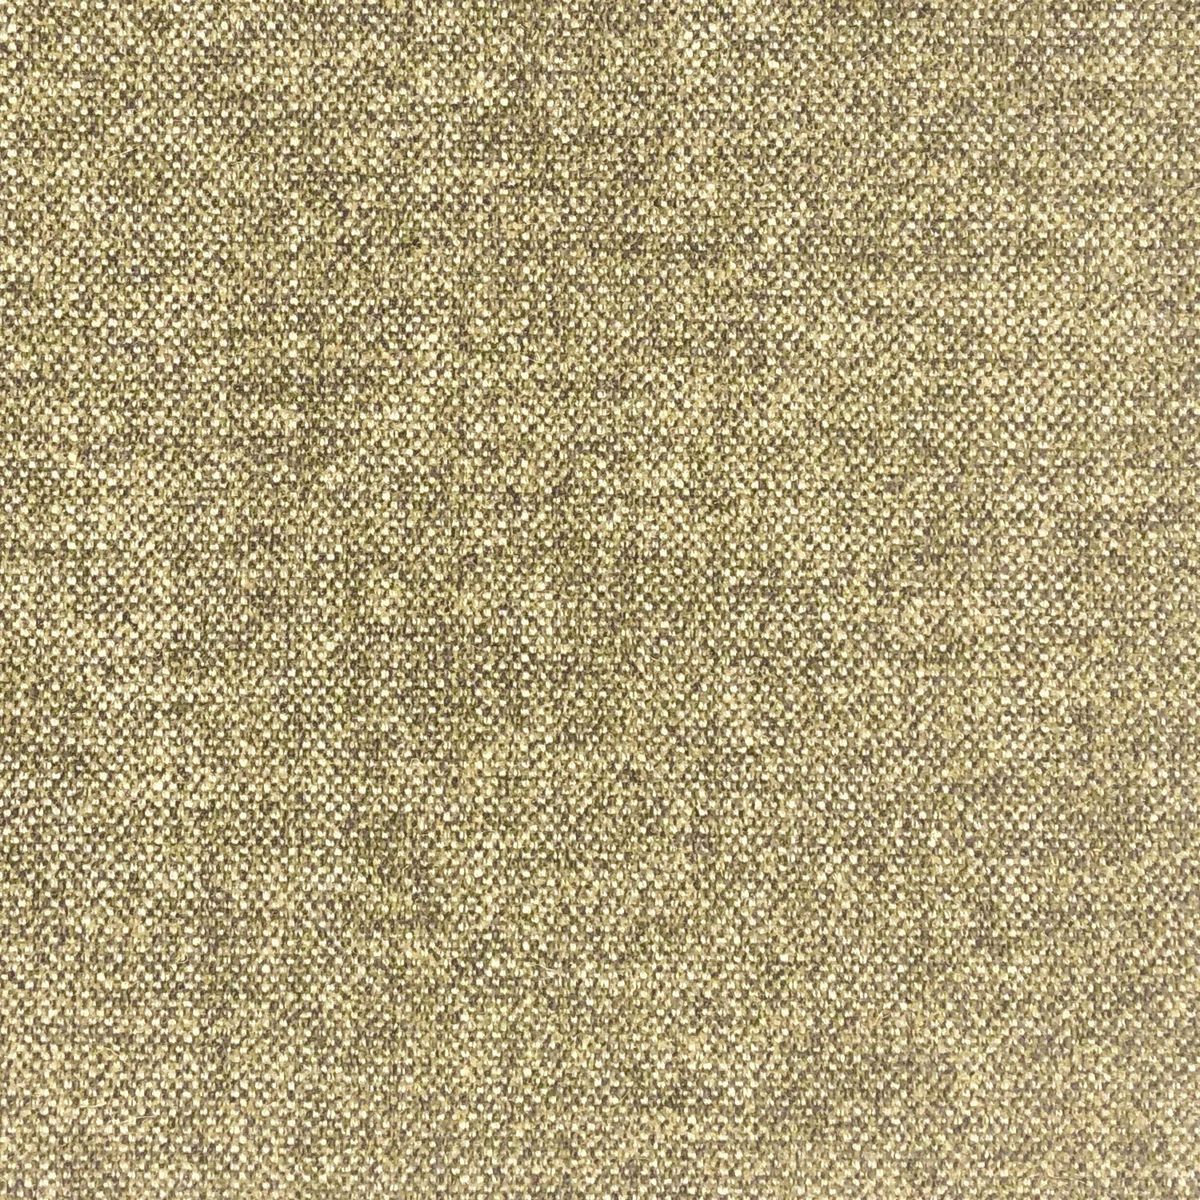 Merino Taupe Fabric by Chatham Glyn